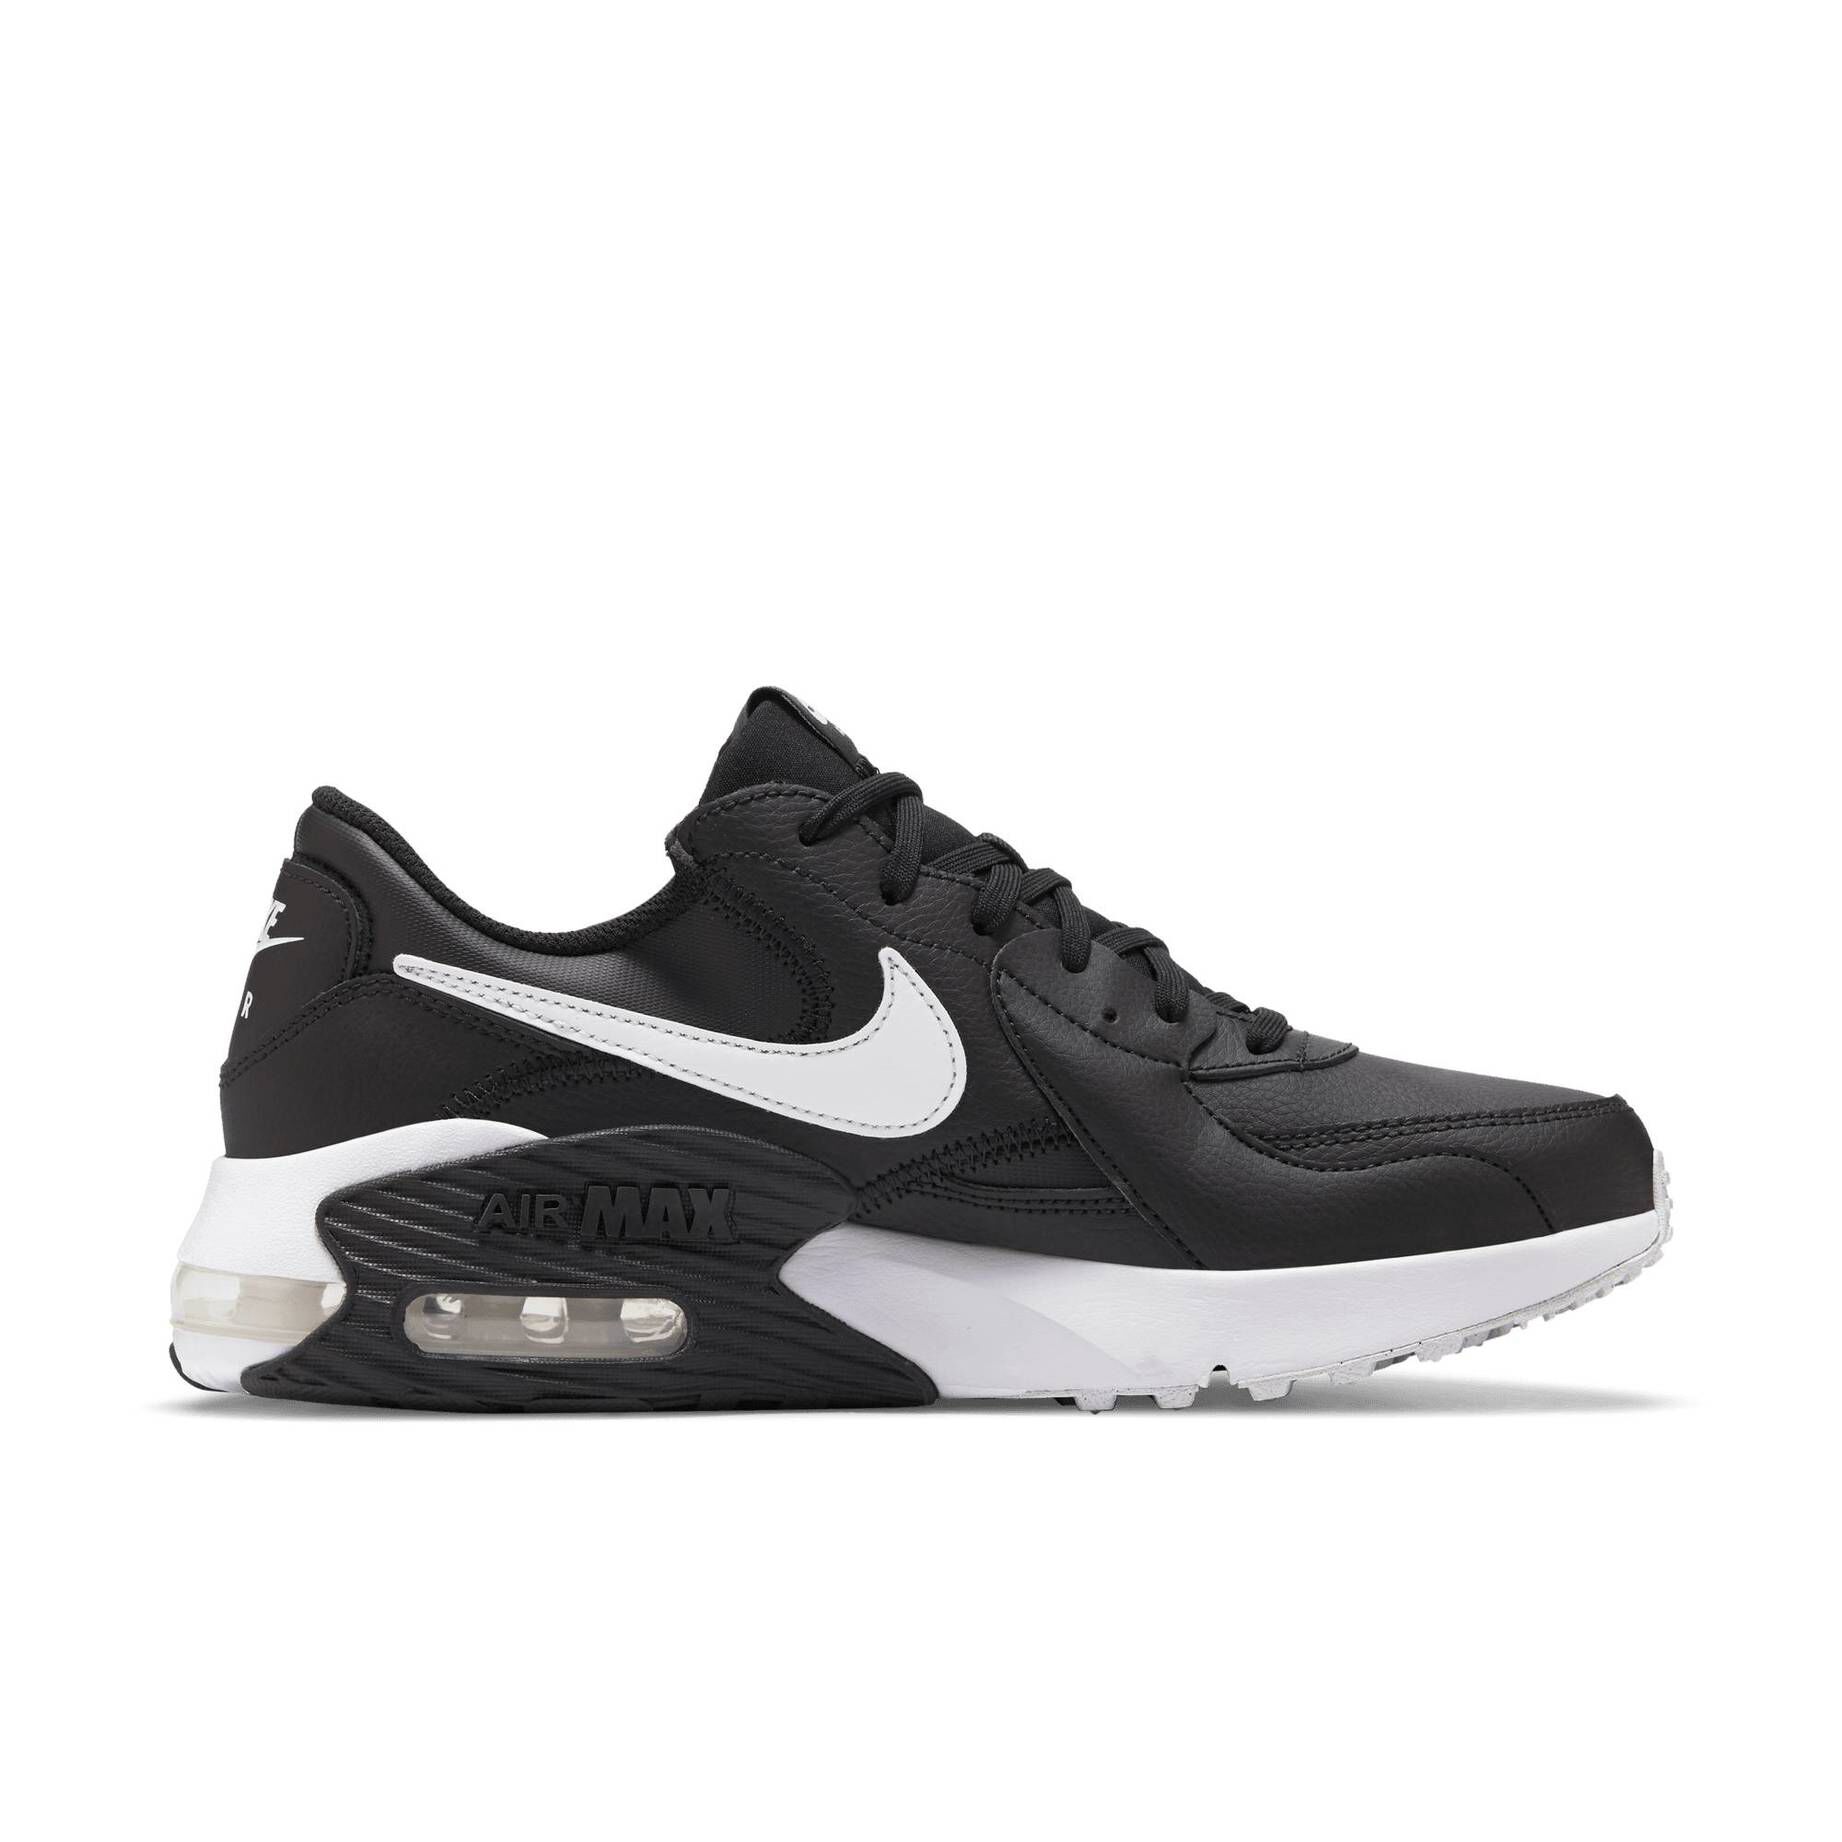 Herren Schuhe Air Max Excee Leather"